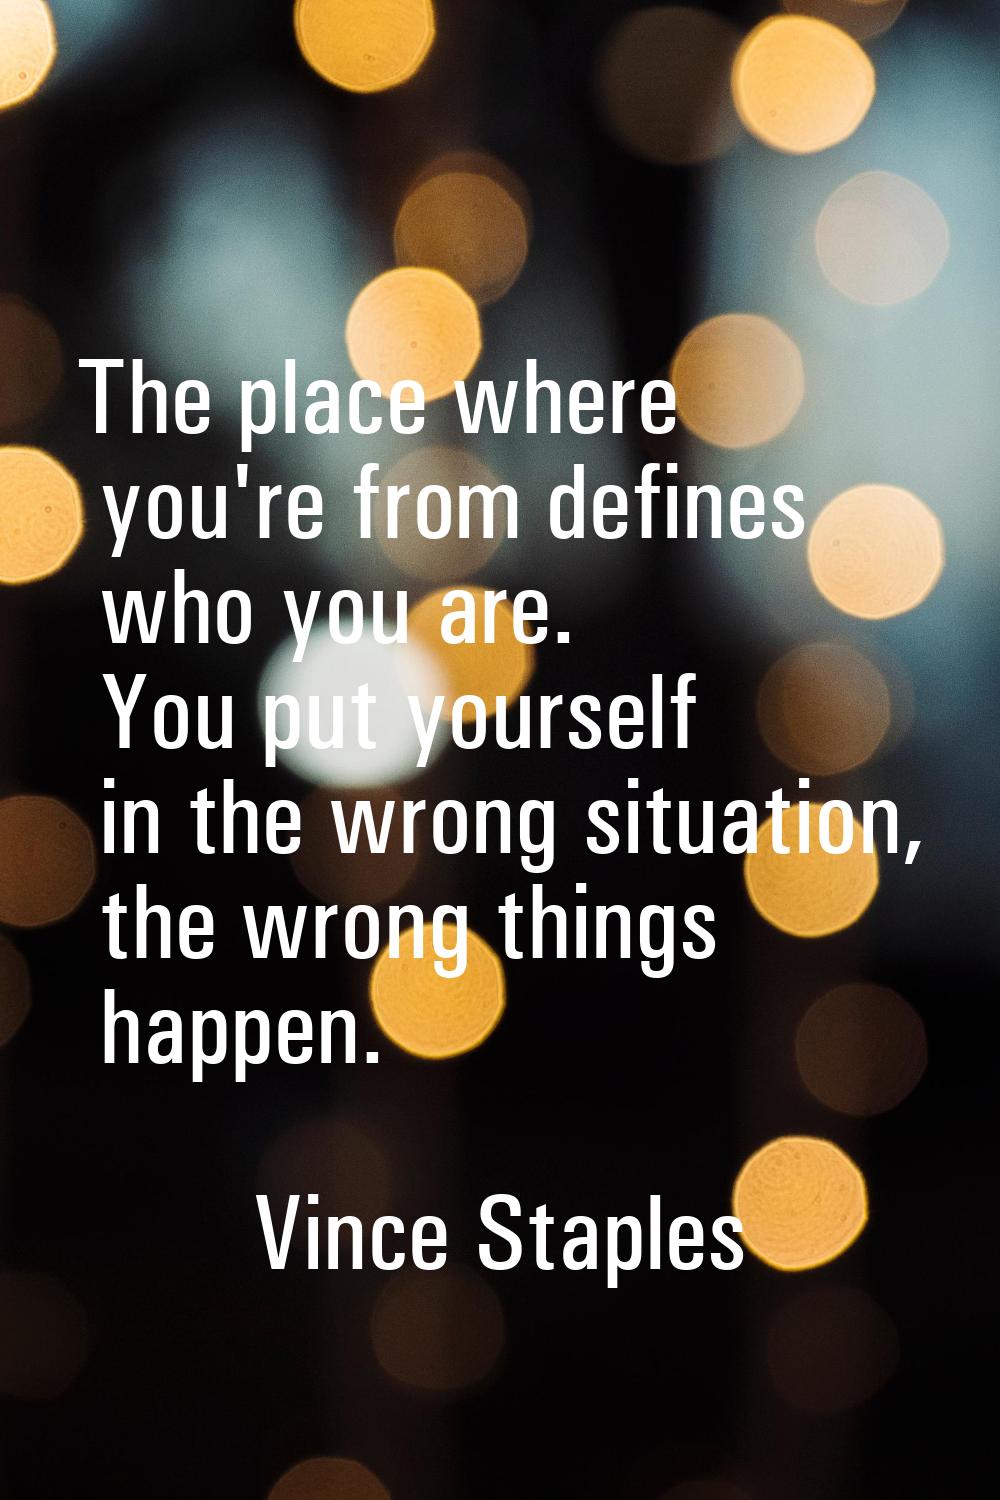 The place where you're from defines who you are. You put yourself in the wrong situation, the wrong